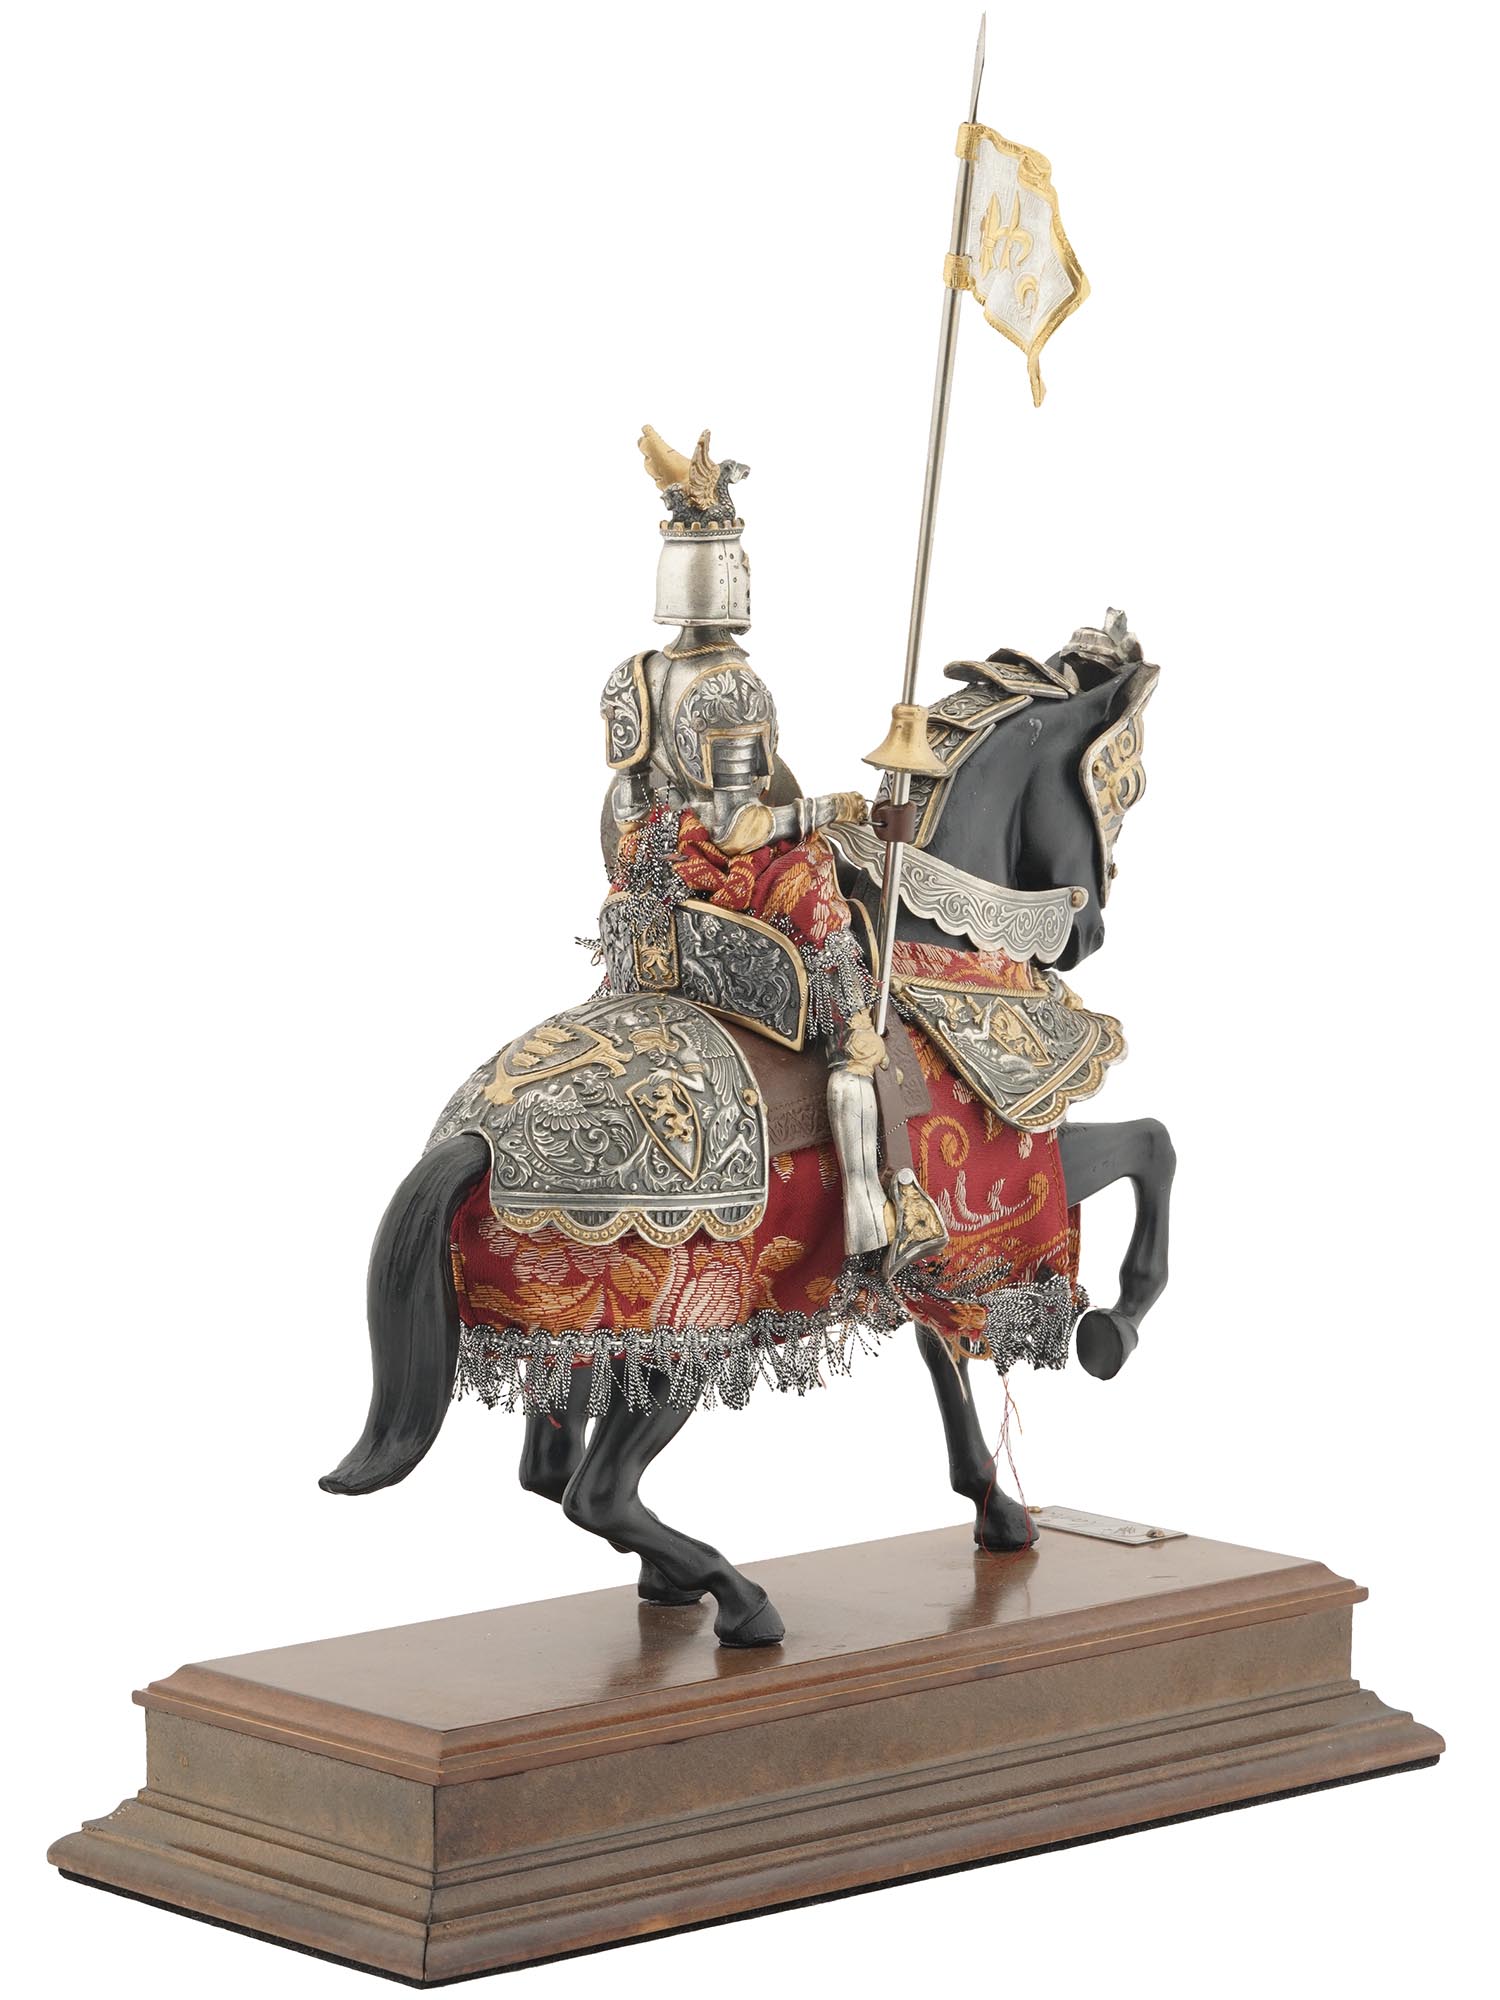 MOUNTED MEDIEVAL KNIGHT ON HORSE FIGURE BY MARTO PIC-1